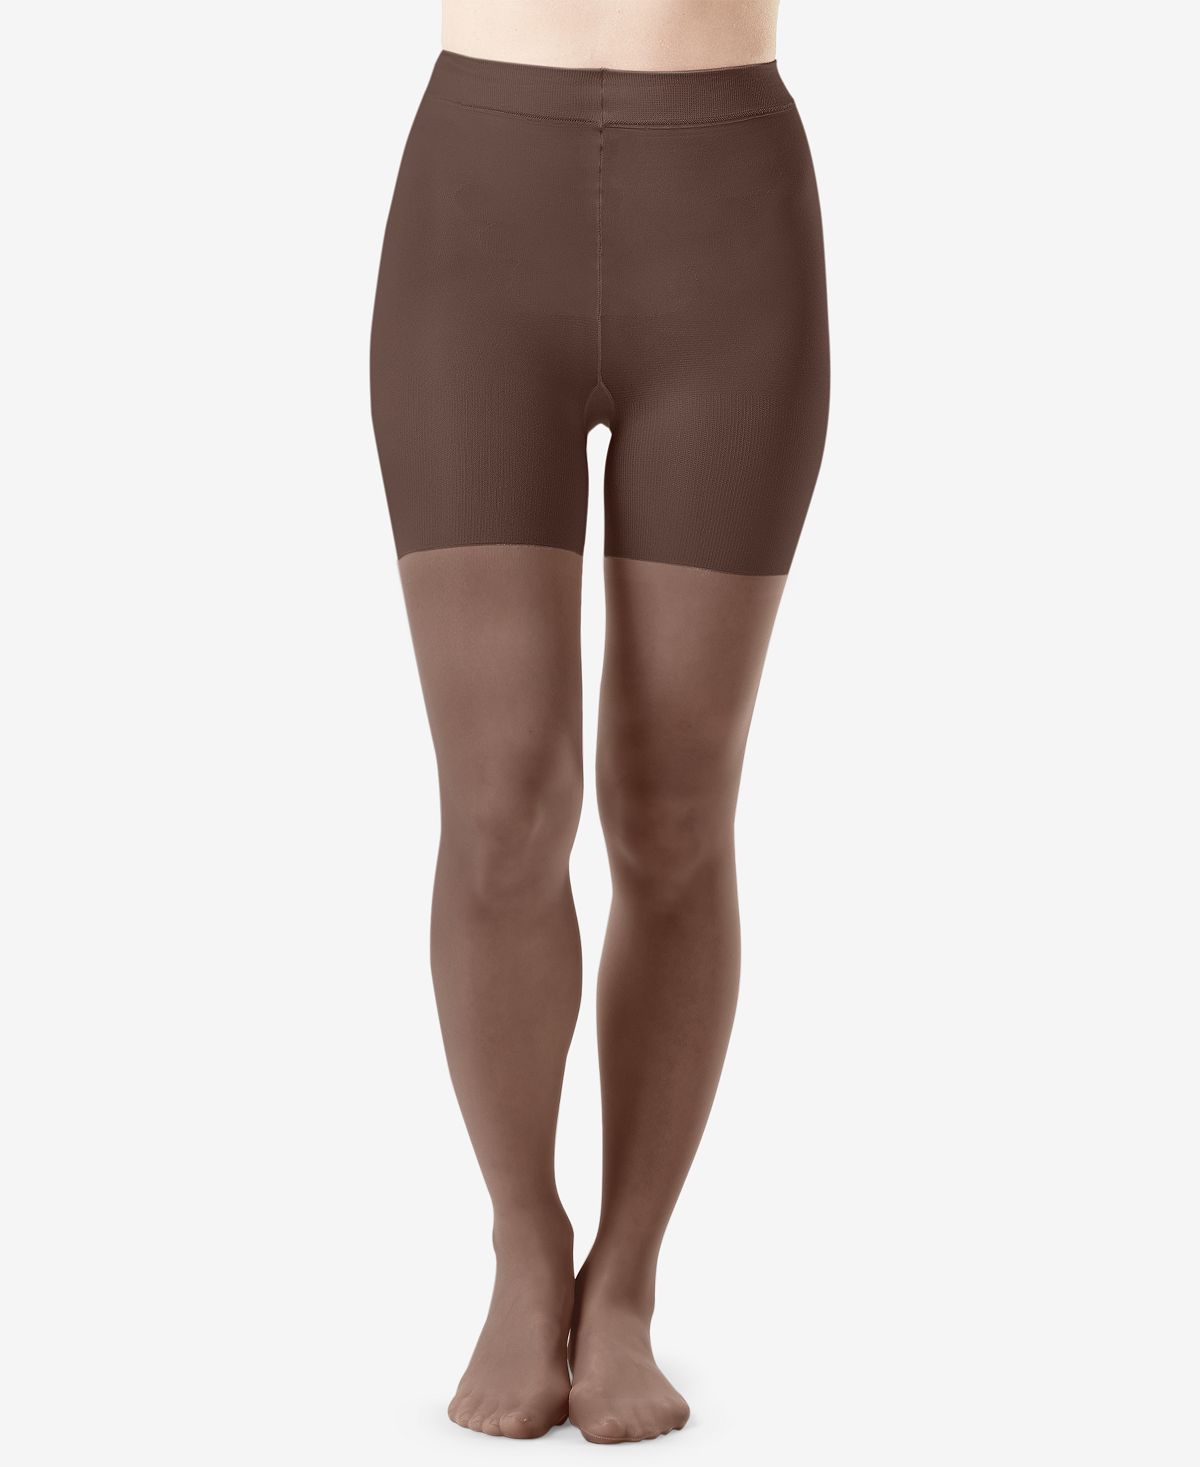 Spanx remarkable Relief Pantyhose Sheers S7 – CheapUndies